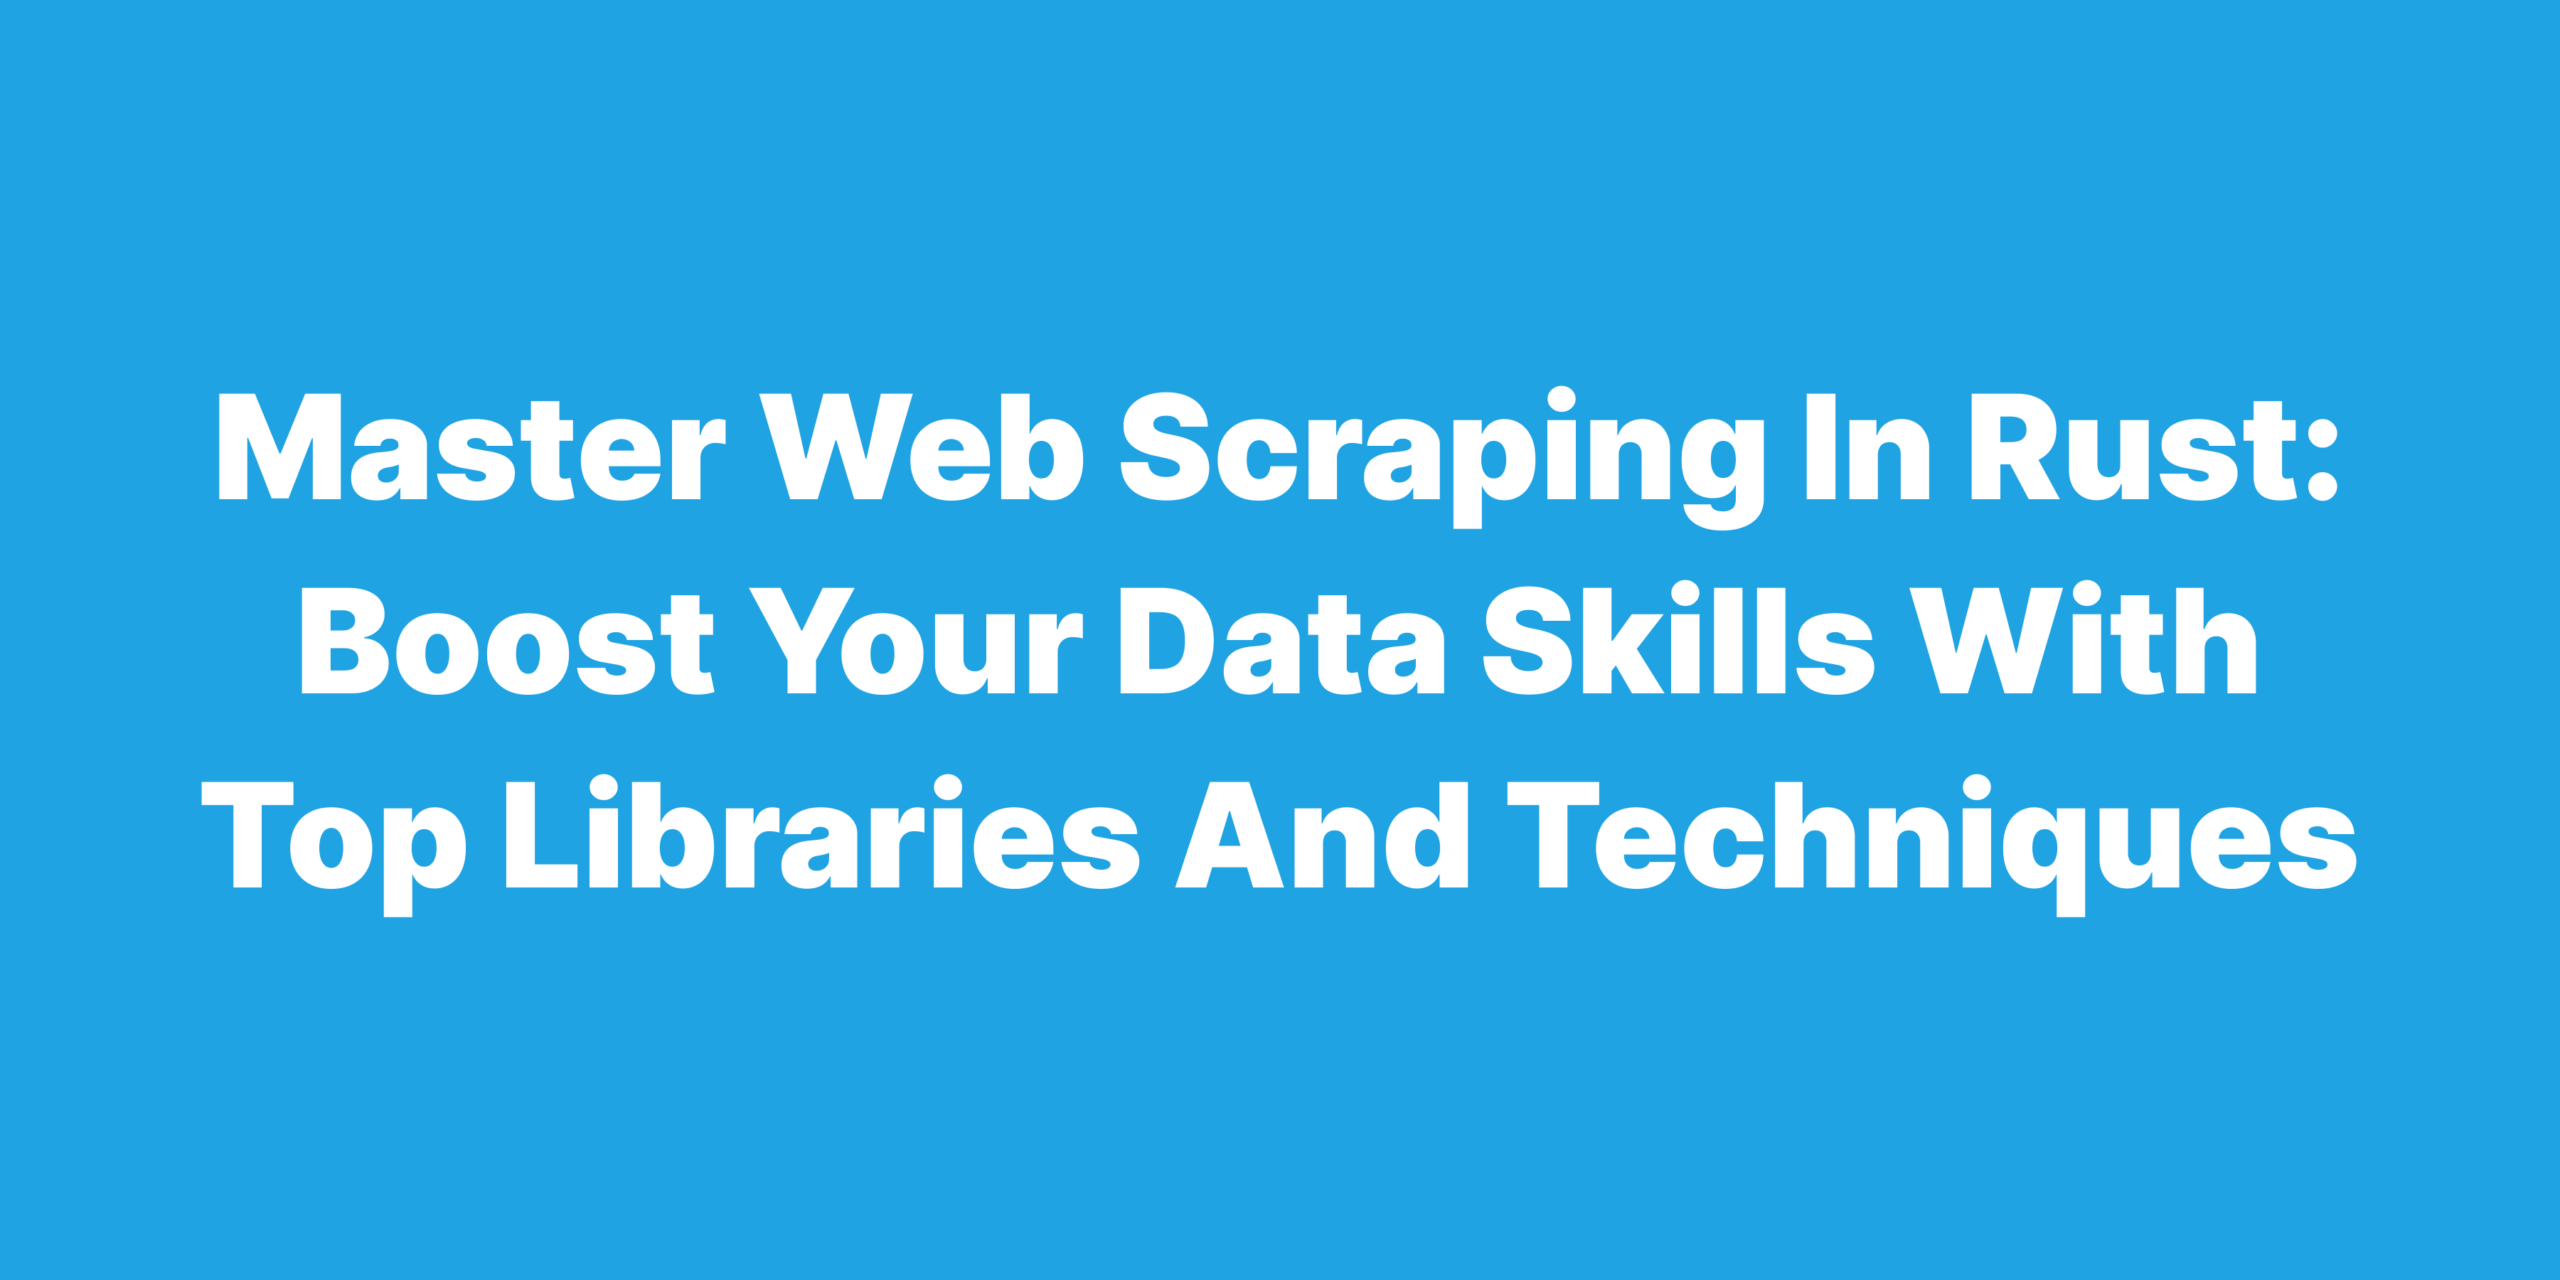 Master Web Scraping in Rust Boost Your Data Skills with Top Libraries and Techniques